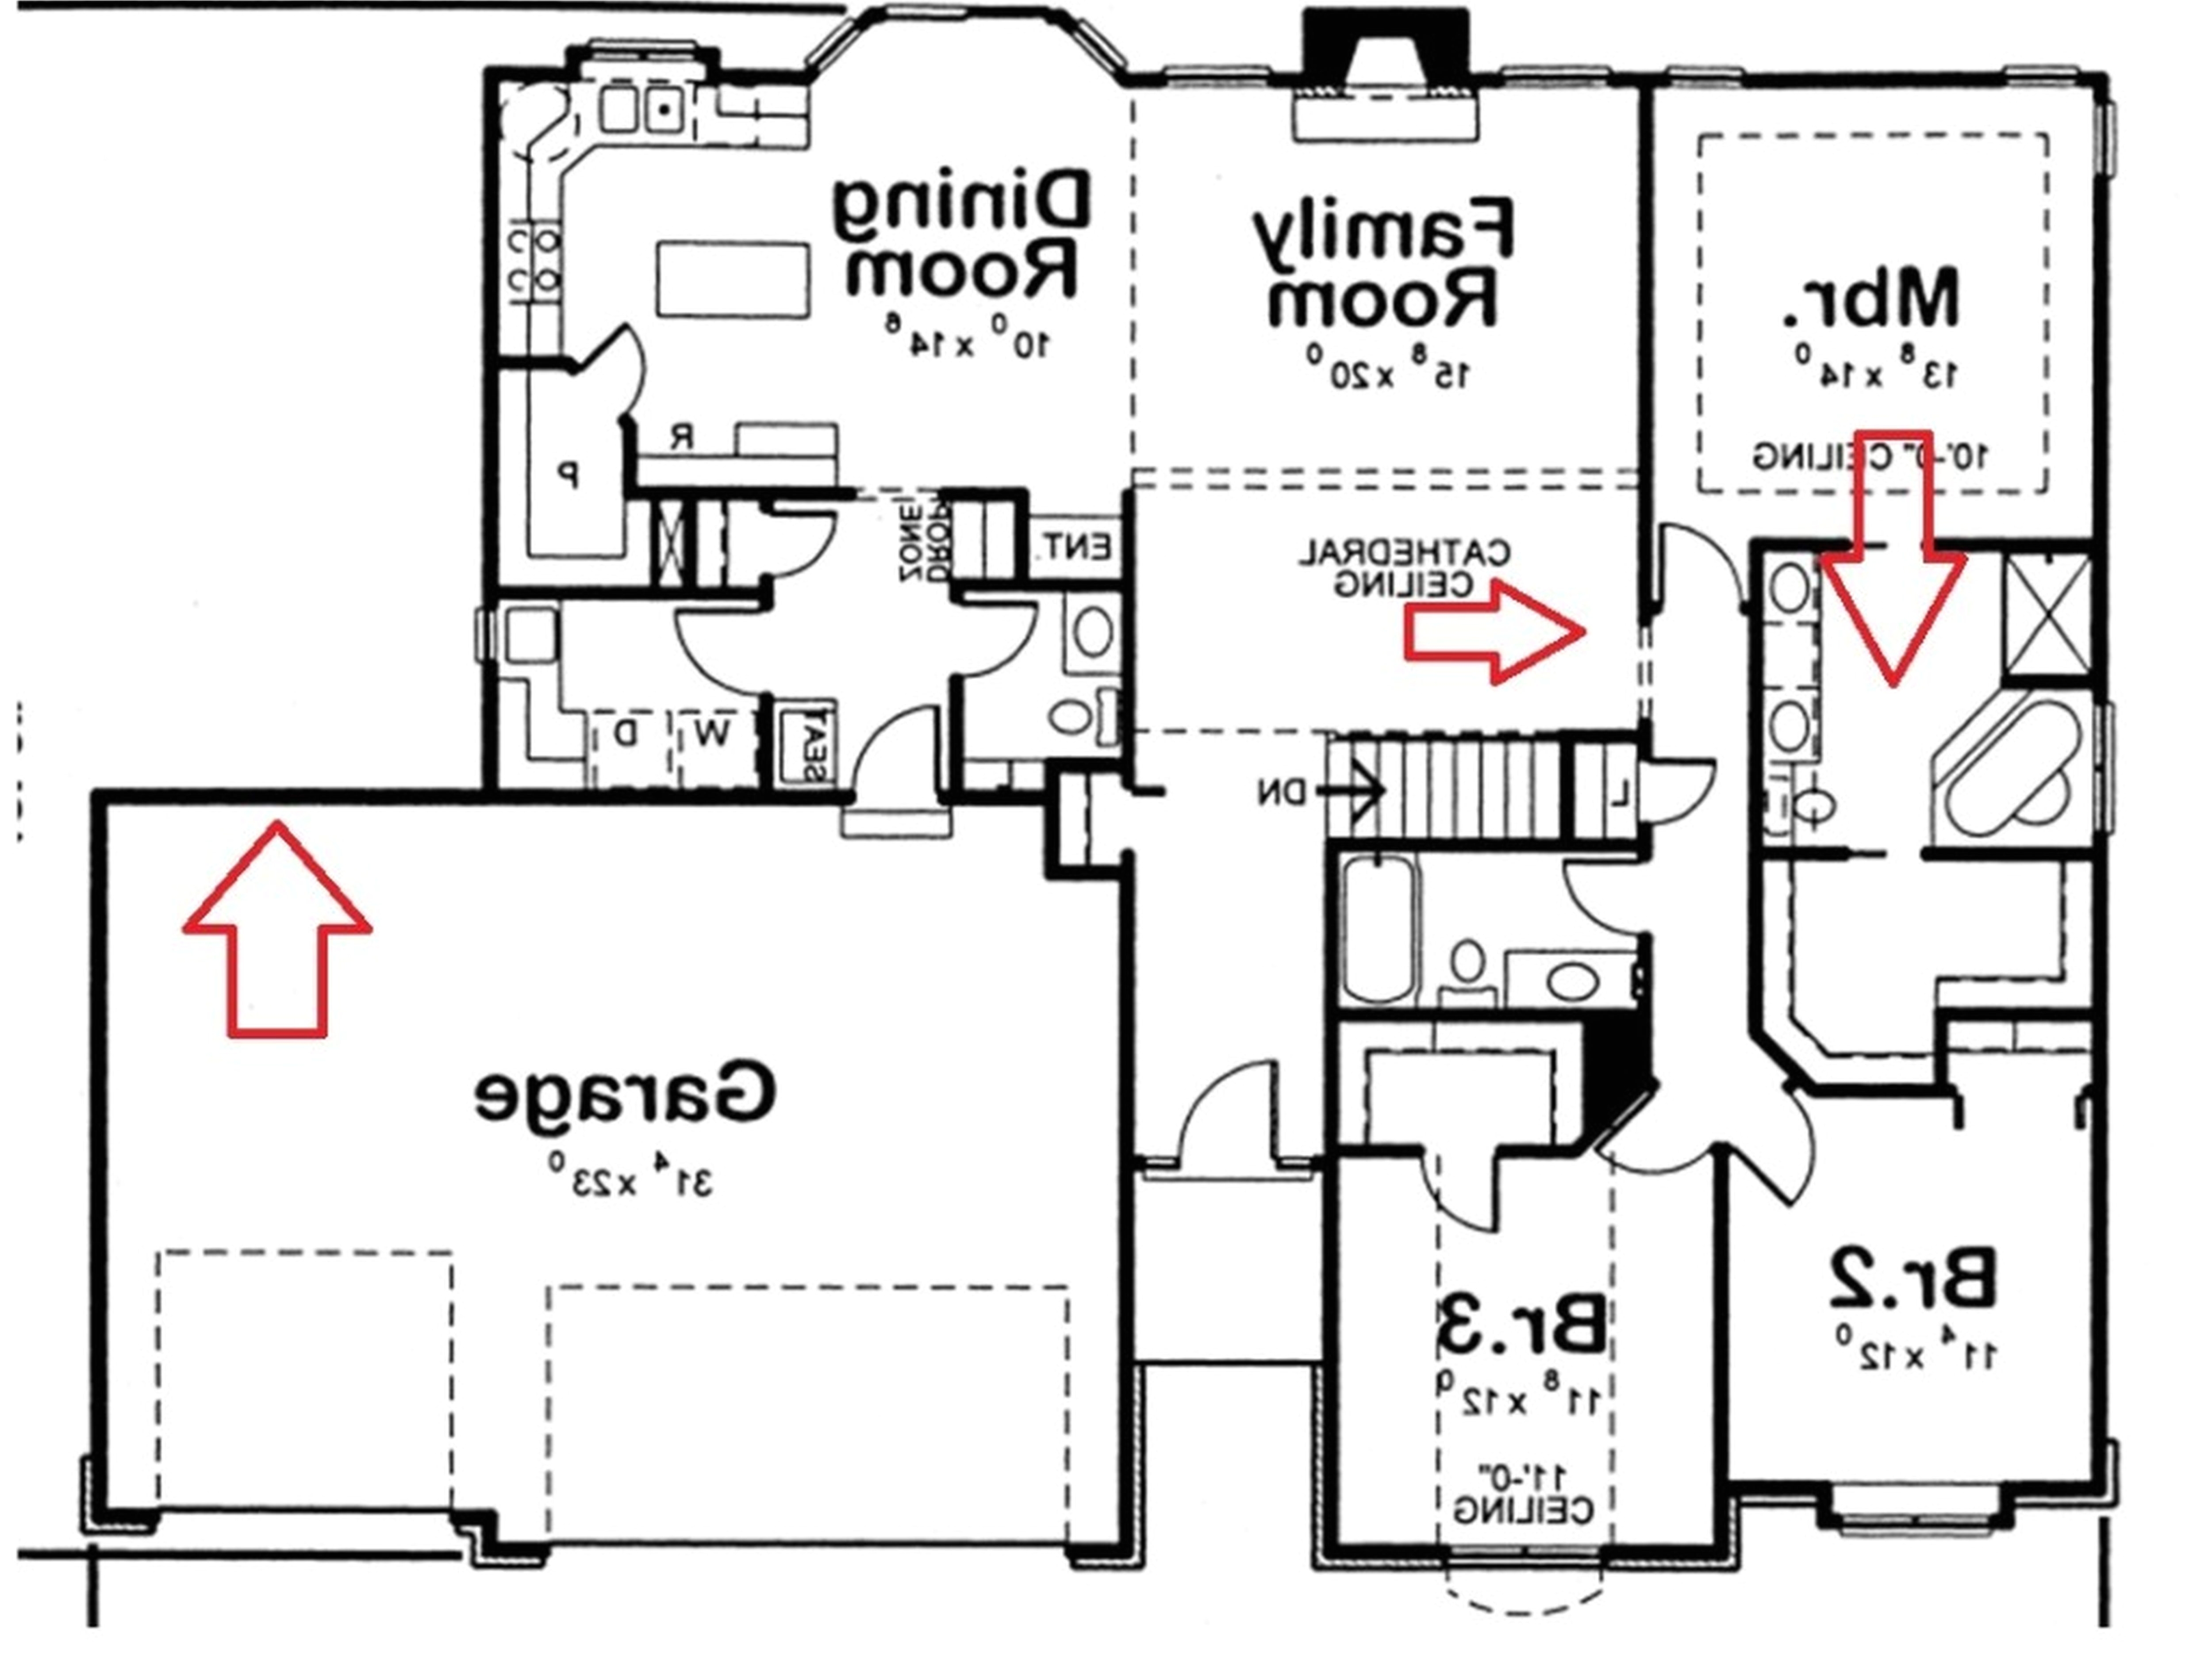 tiny house architectural plans fresh small house plans fresh design floor plans fresh home plans 0d